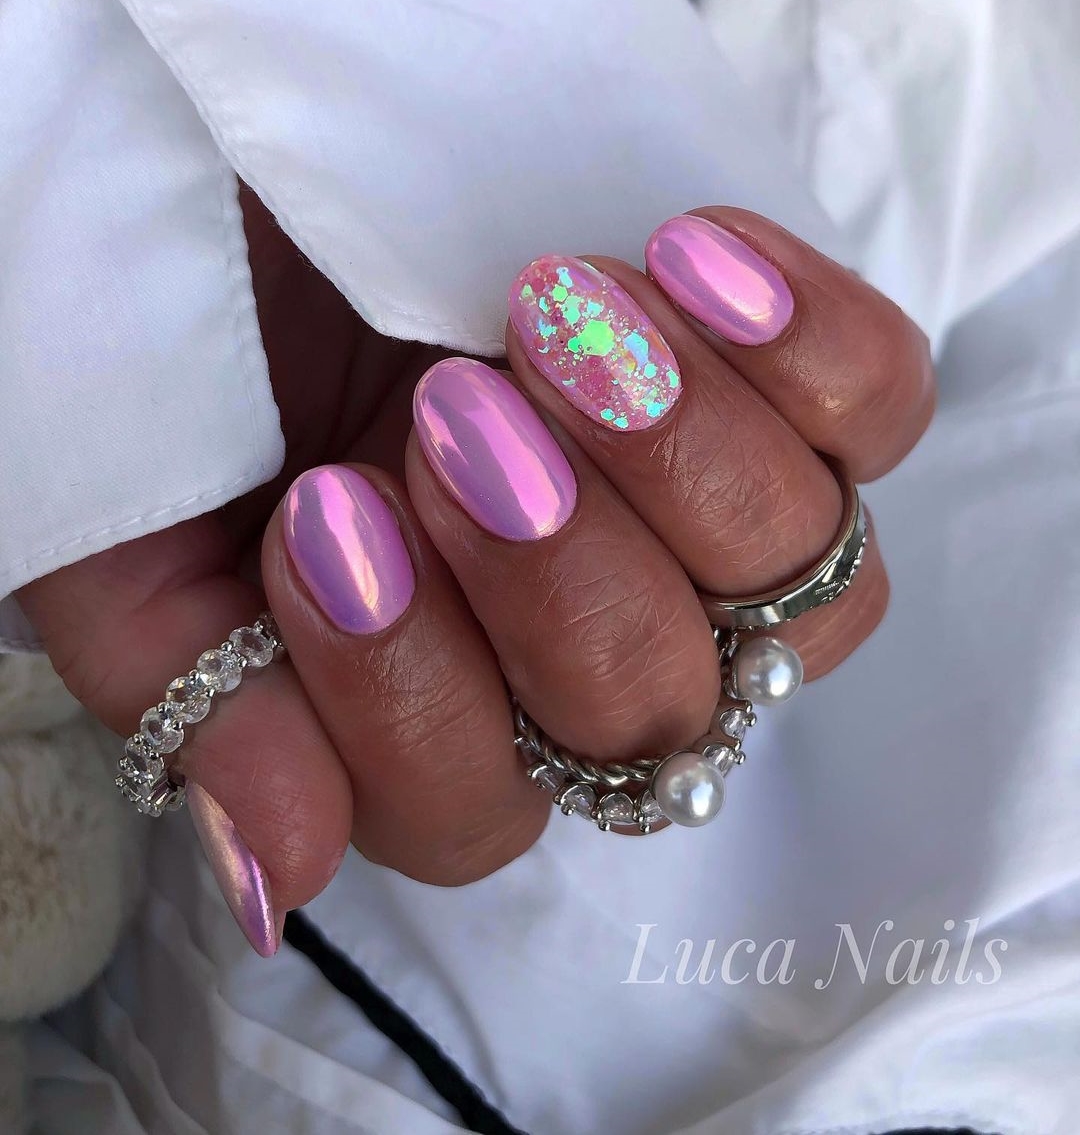 Short Pink Chrome Nails with Glitters